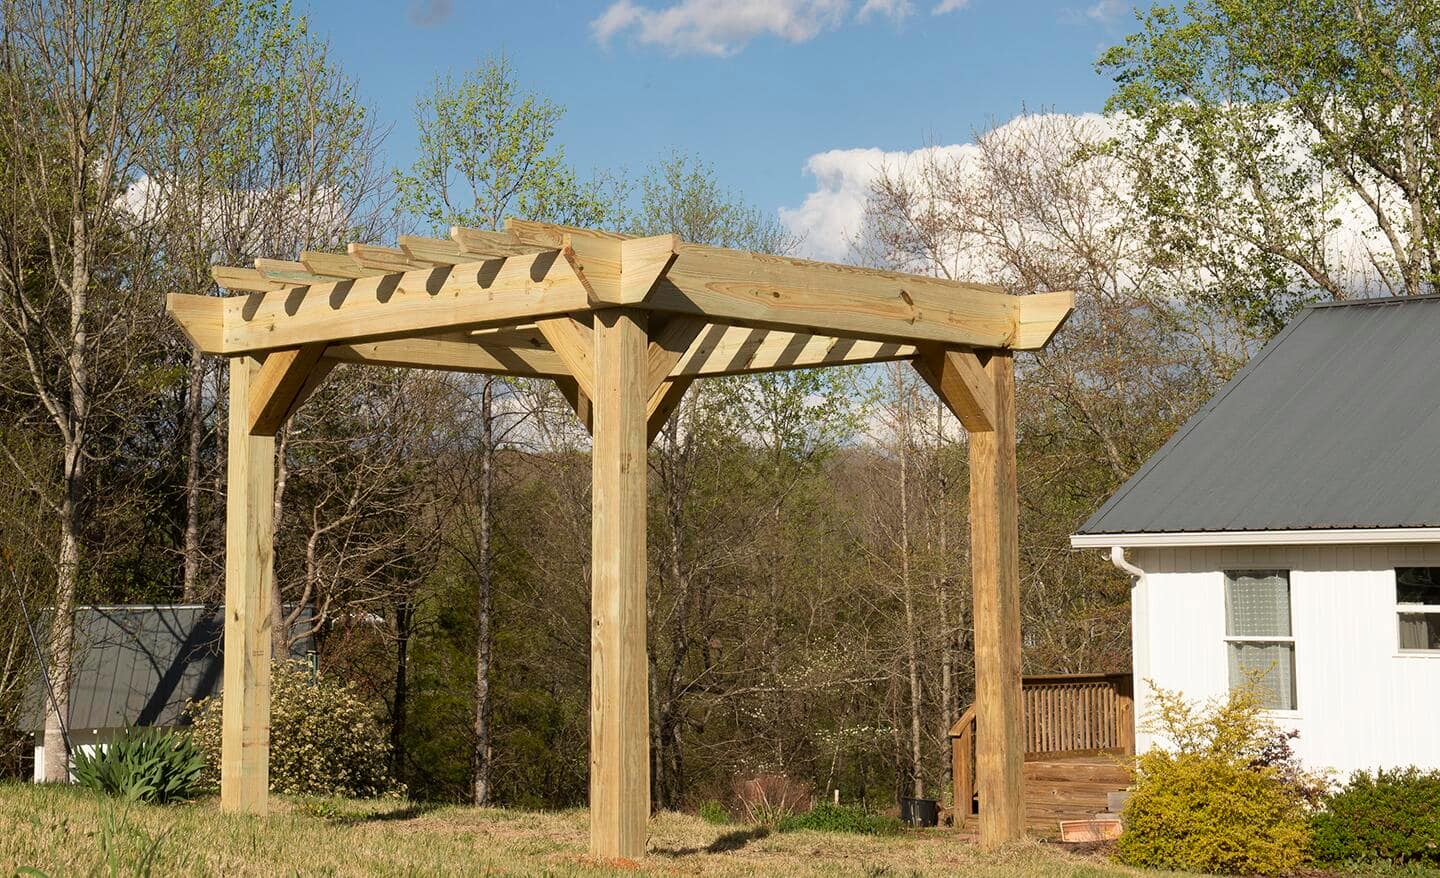 The finished pergola with a house and trees in the background.